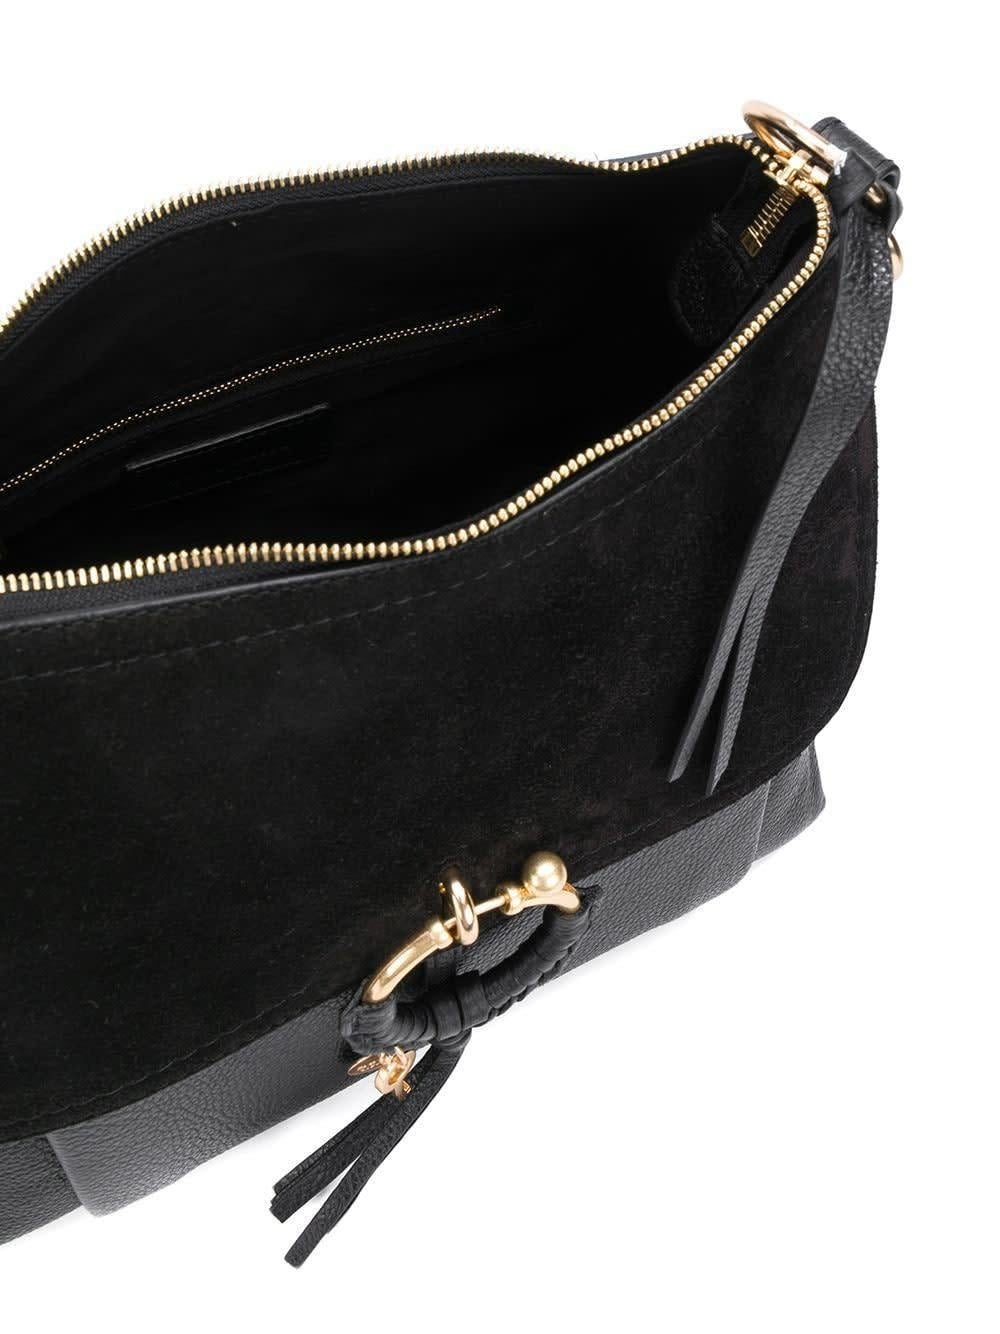 This Joan hobo bag by See By Chloé is made of black calf leather and features a detachable and adjustable shoulder strap, a top handle, a top zip fastening, gold-tone hardware, a tassel, an engraved logo charm and a braided detail, an internal zip